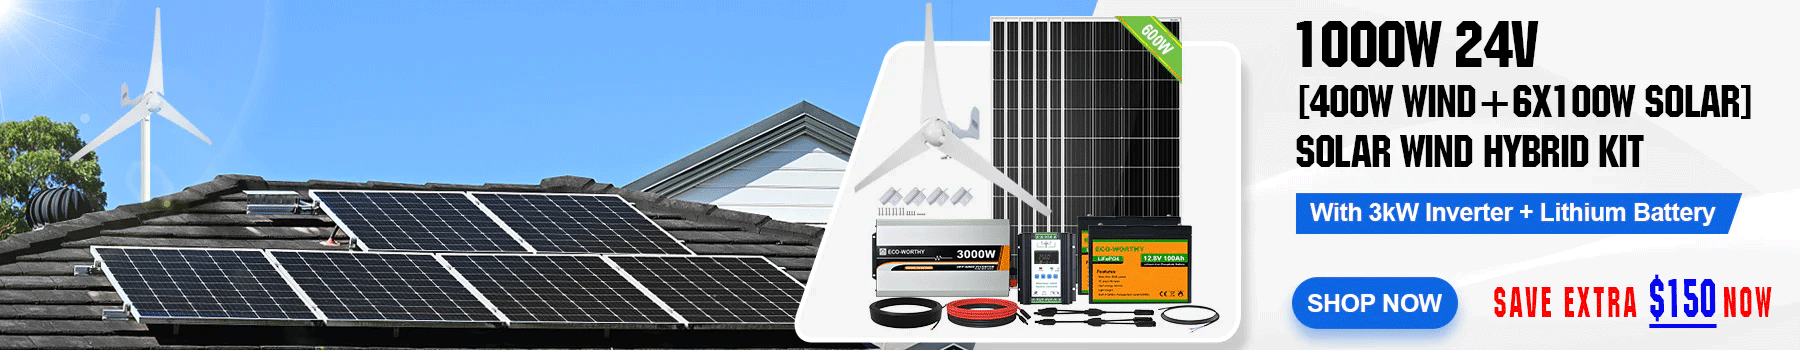 ECO-WORTHY 100W Solar Kit hits new low at $99, more